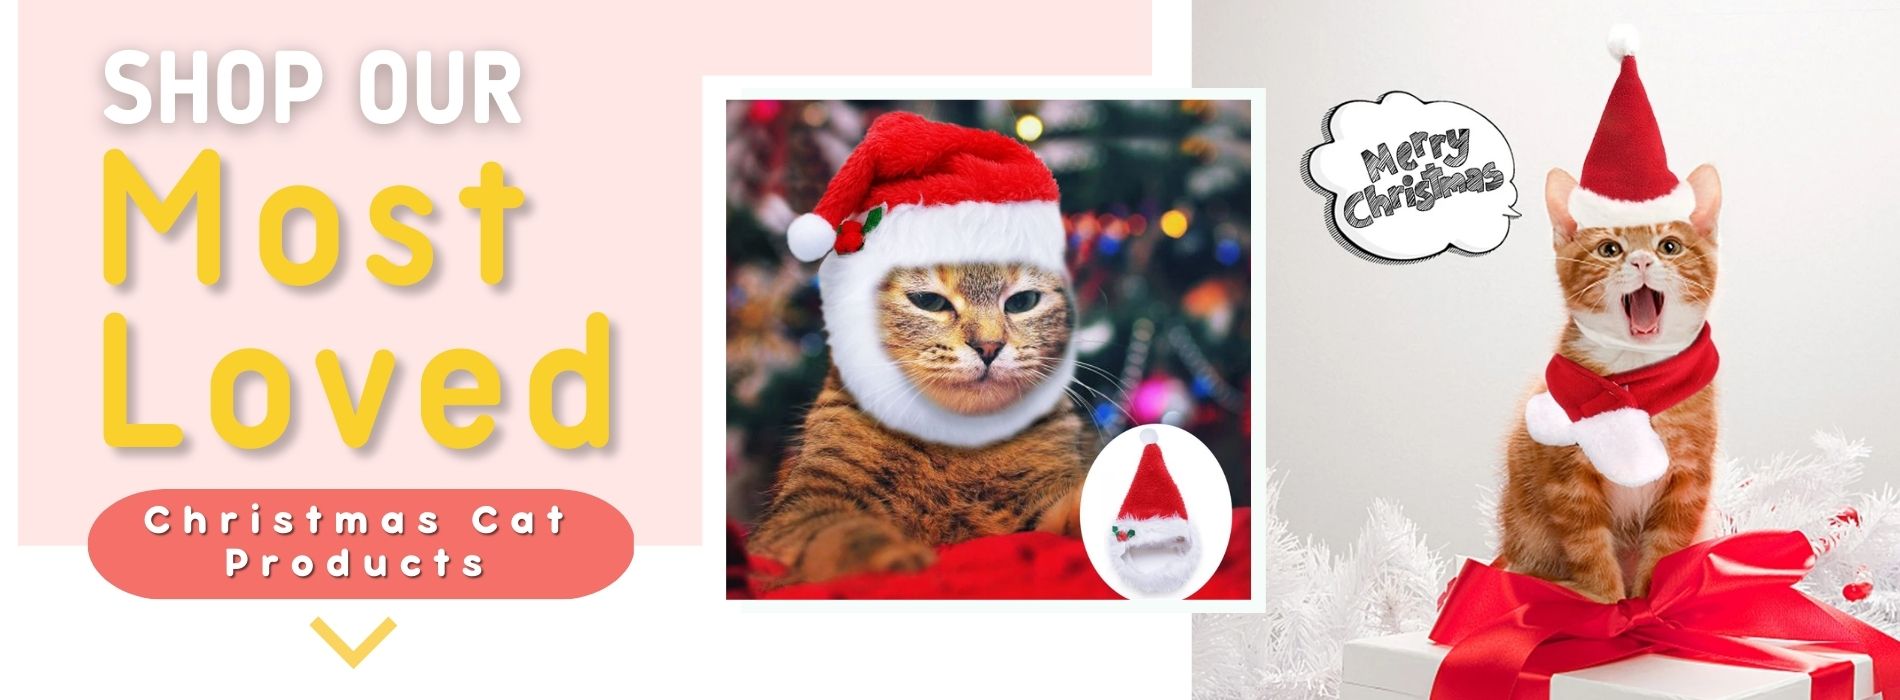 christmas-cat-products-gifts